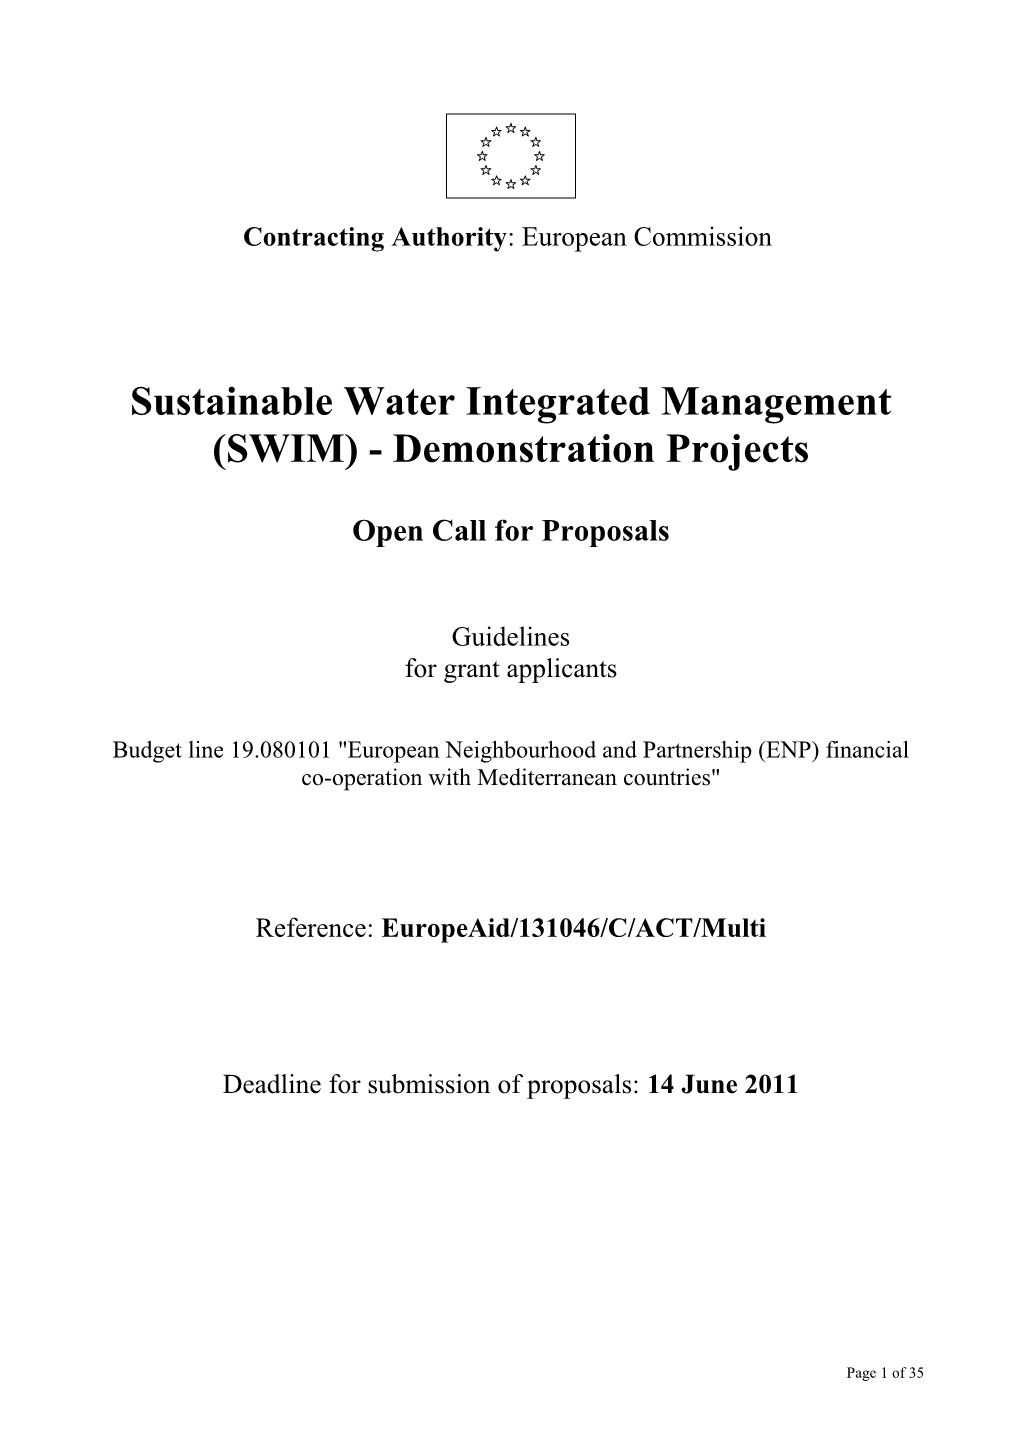 Sustainable Water Integrated Management (SWIM) - Demonstration Projects